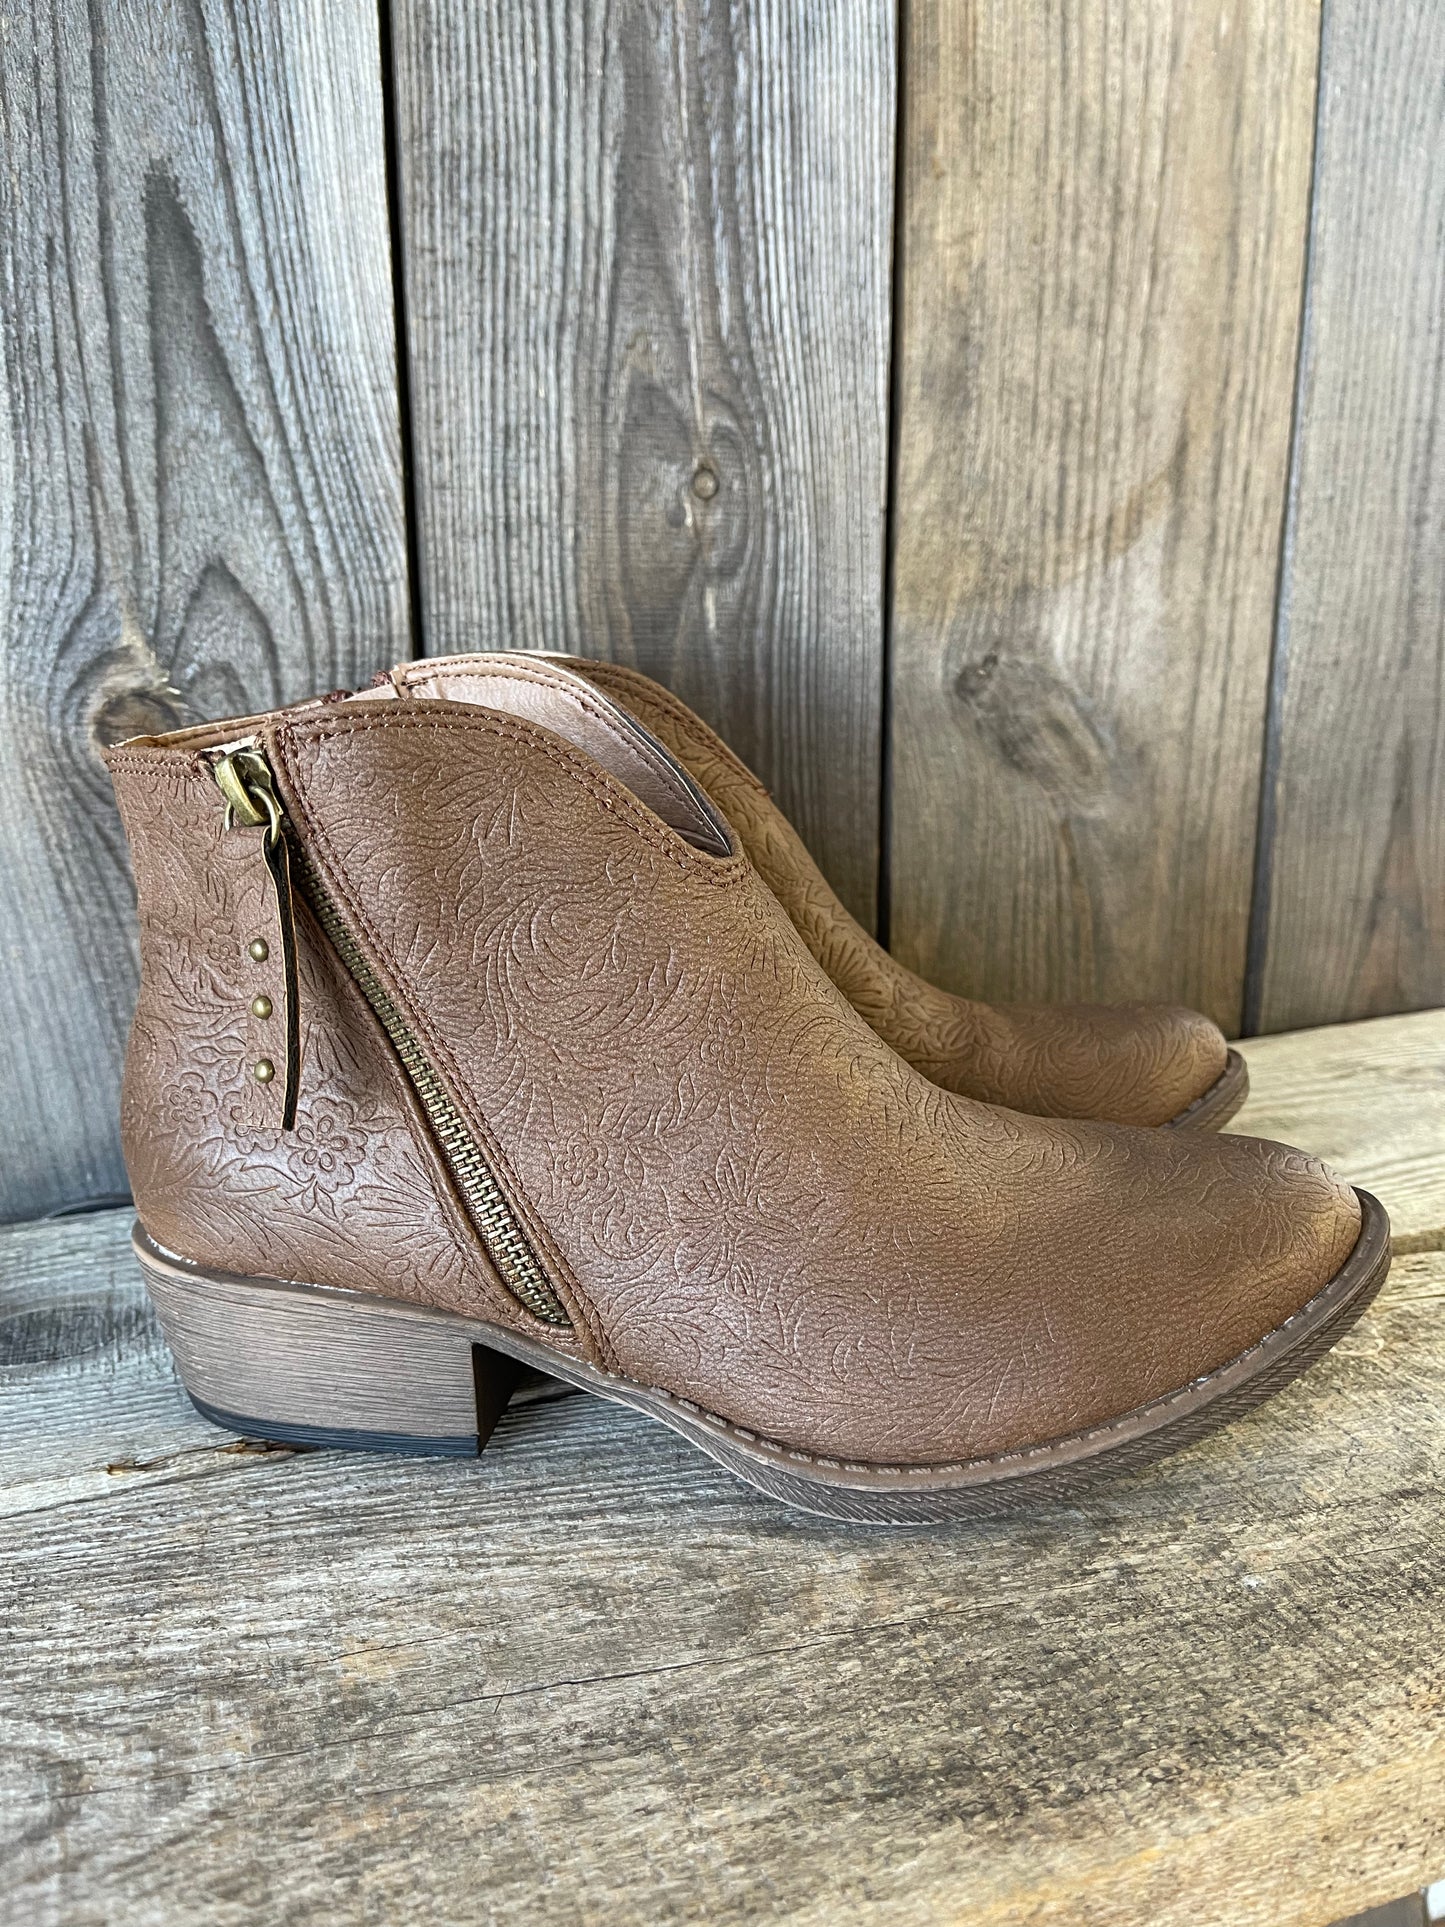 The Outlaw Tooled Ankle Bootie - Tan